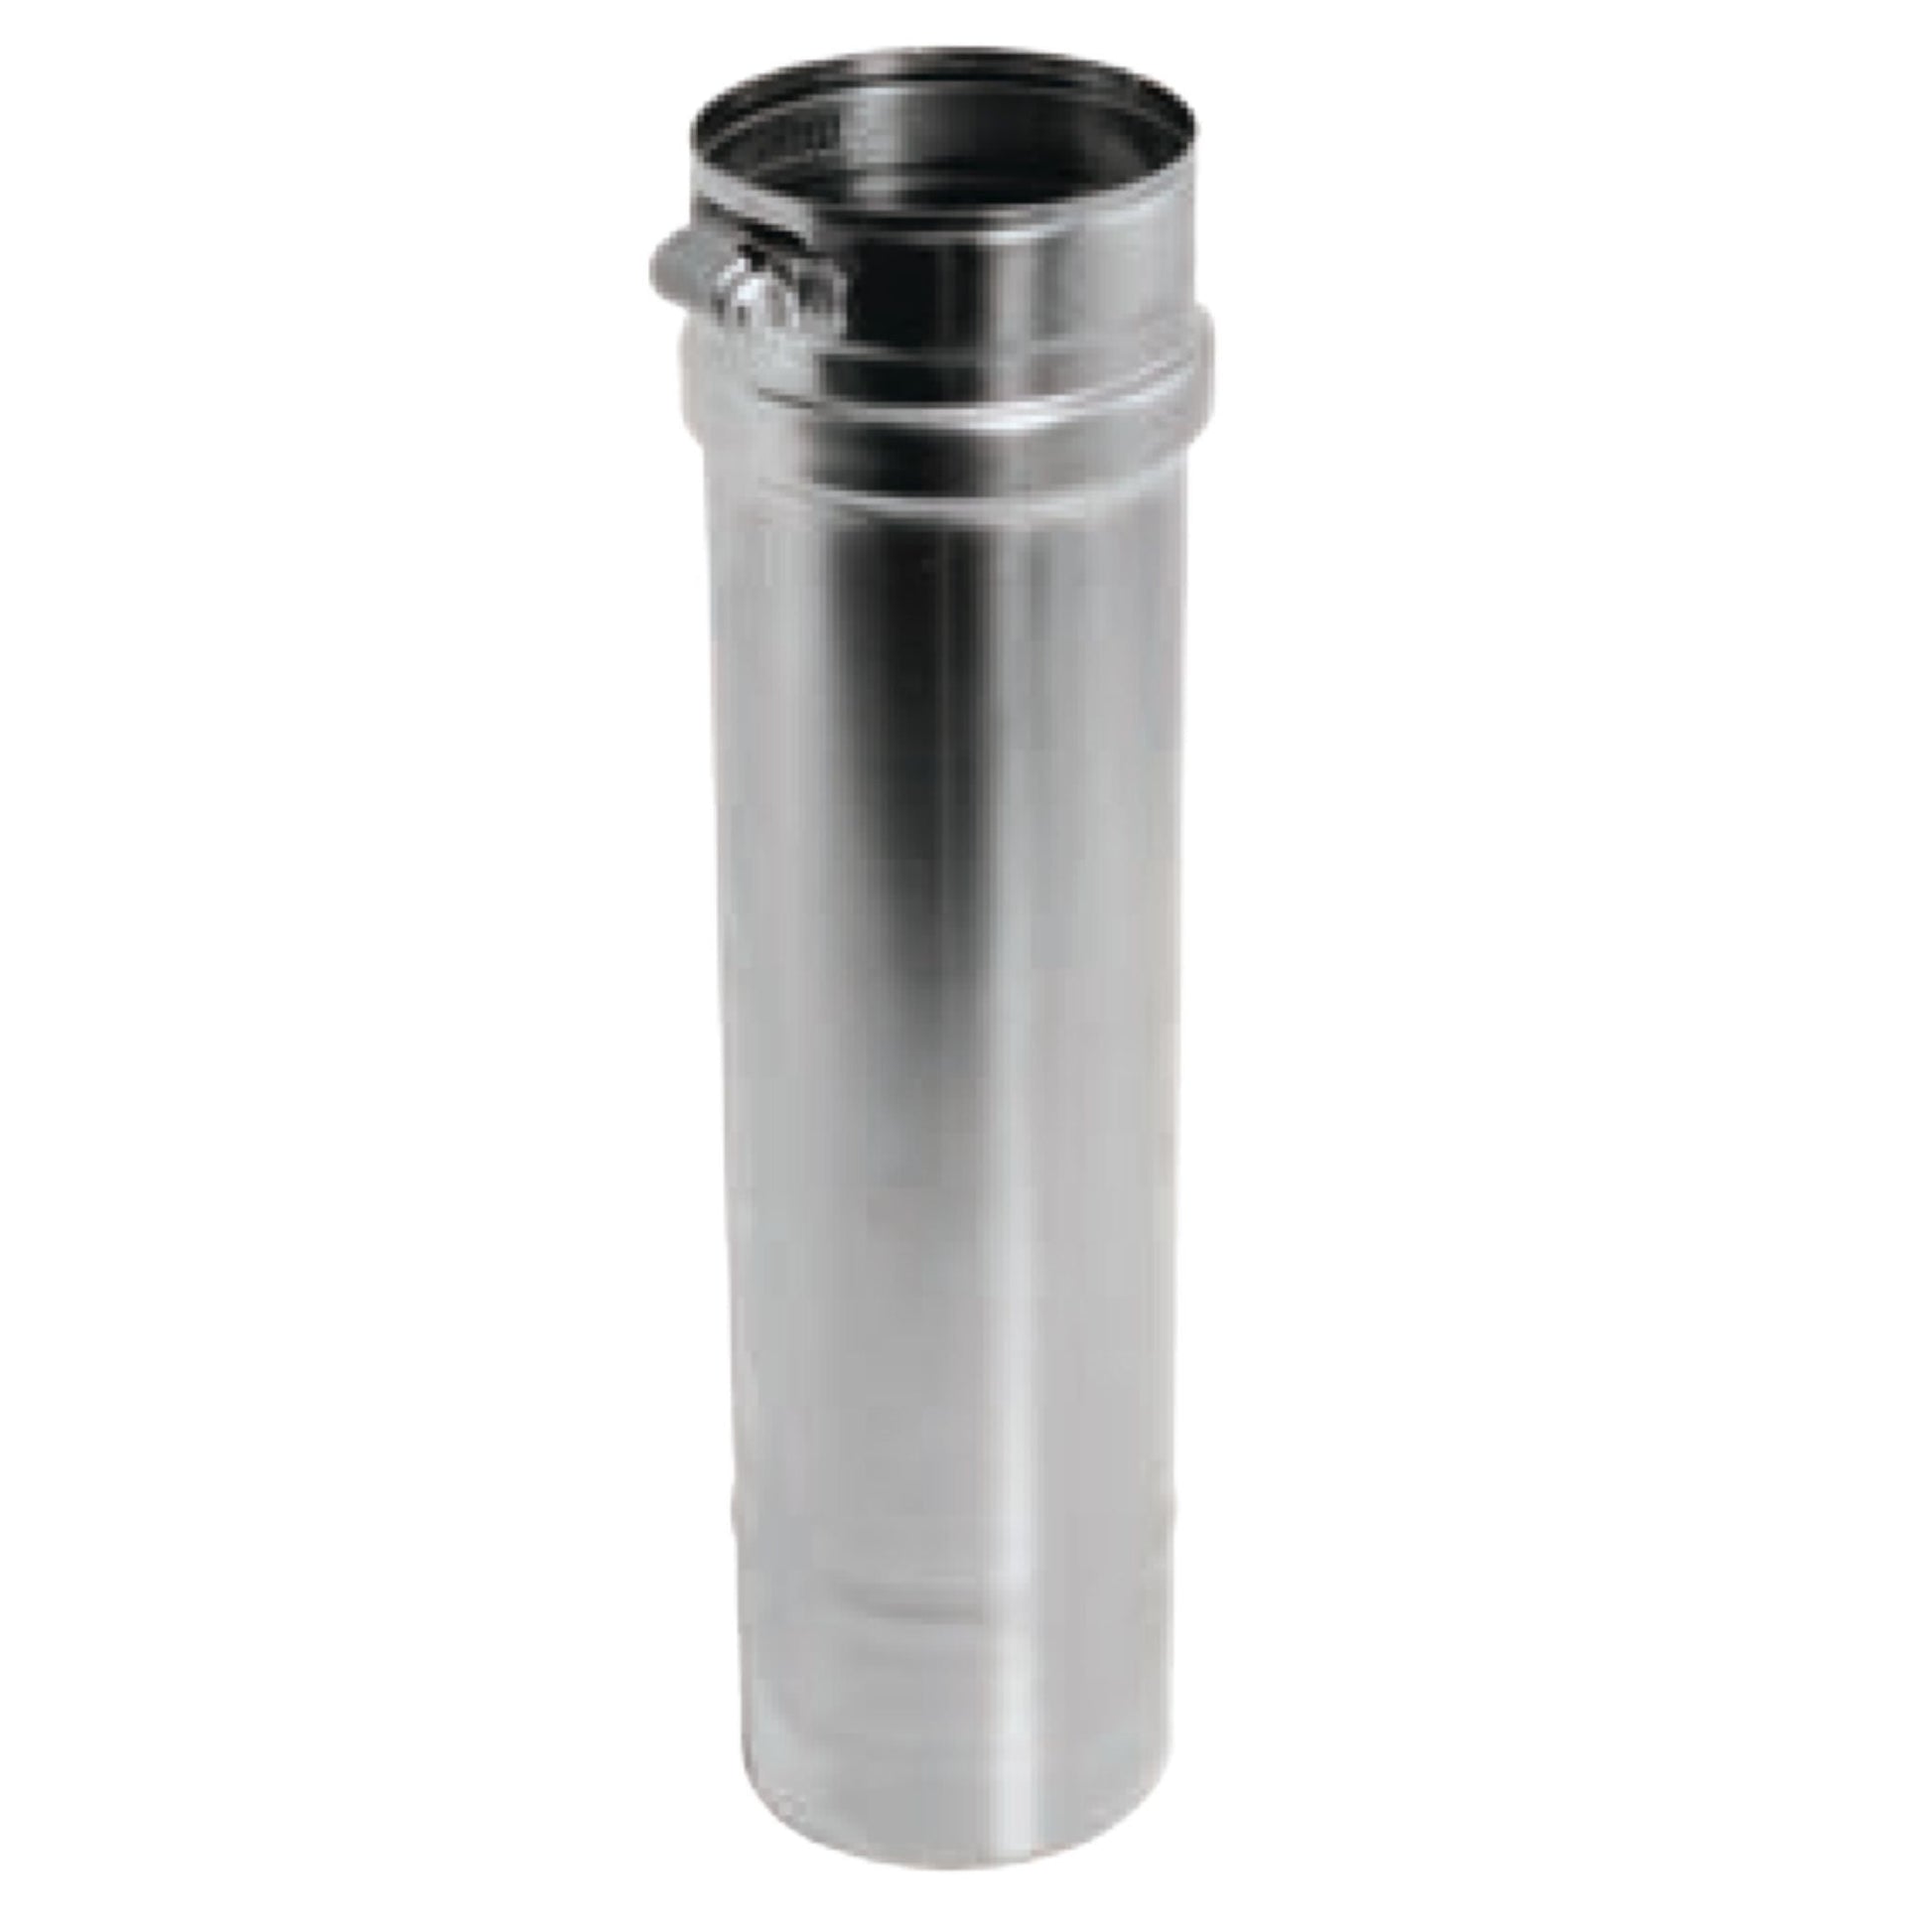 DuraVent FasNSeal 6" x 48" 316L Stainless Steel Vent Length